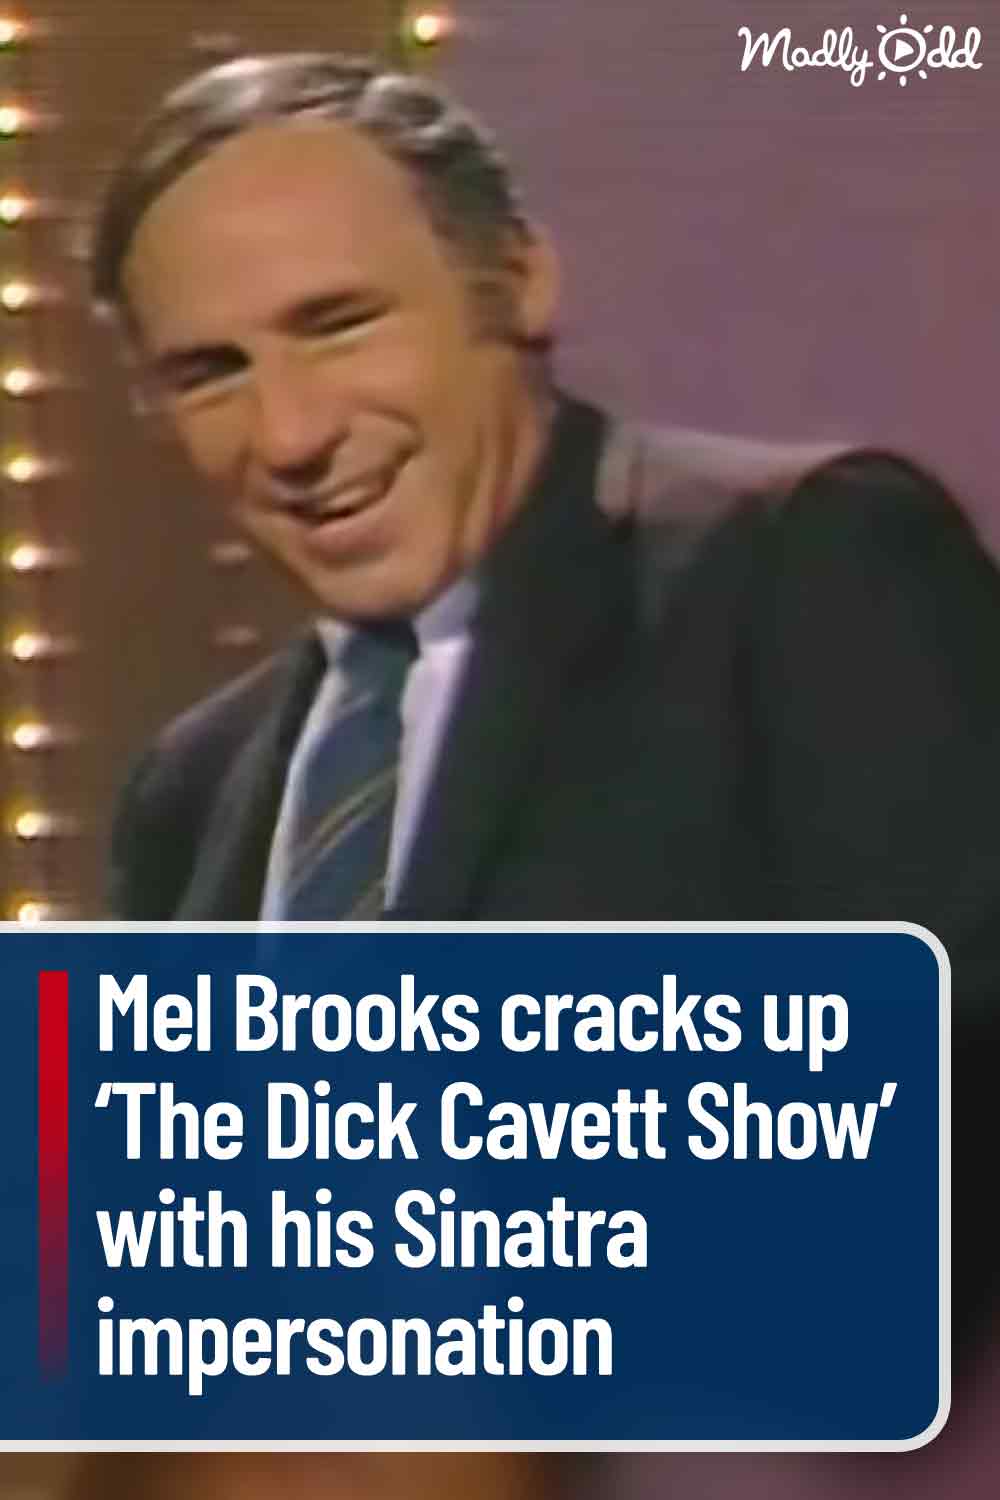 Mel Brooks cracks up ‘The Dick Cavett Show’ with his Sinatra impersonation